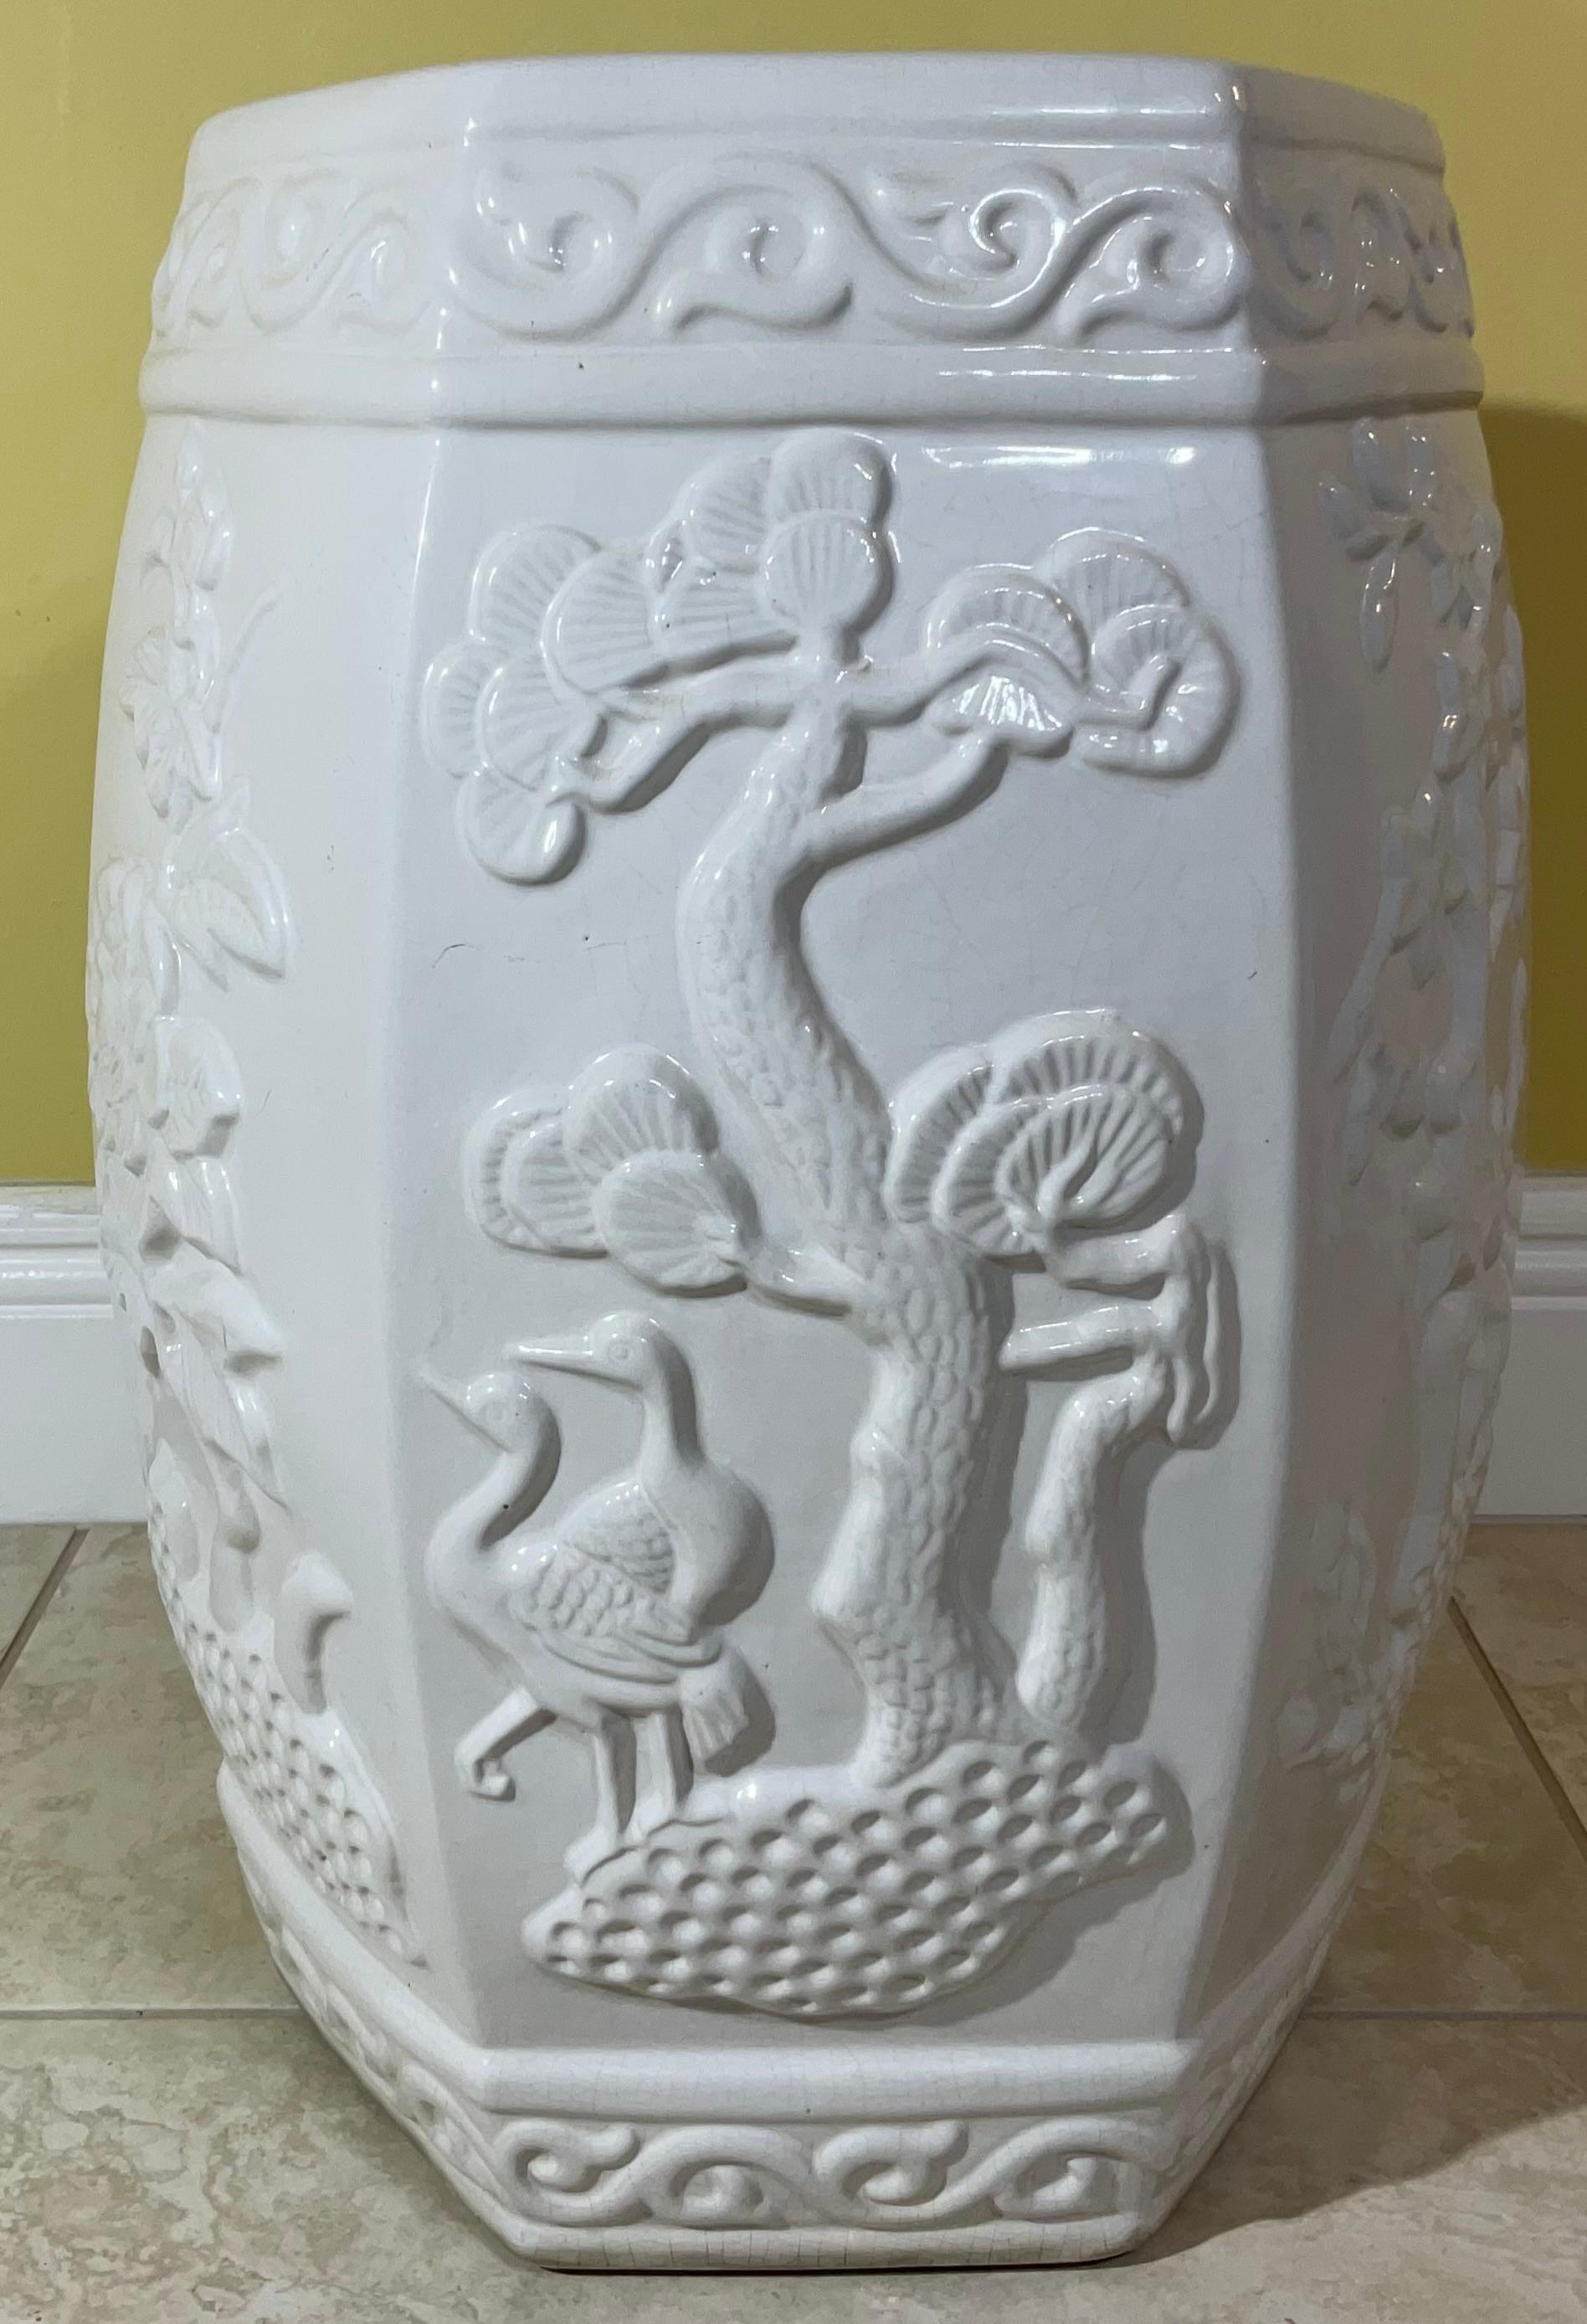 Very nice ceramic garden stool table is a classic Chinese six side form of garden decor in a good monochrome white glaze, decorated with bird flowers and plants motifs with top and bottom scroll band of Chinese decor. 
perfect pice to use indoors or